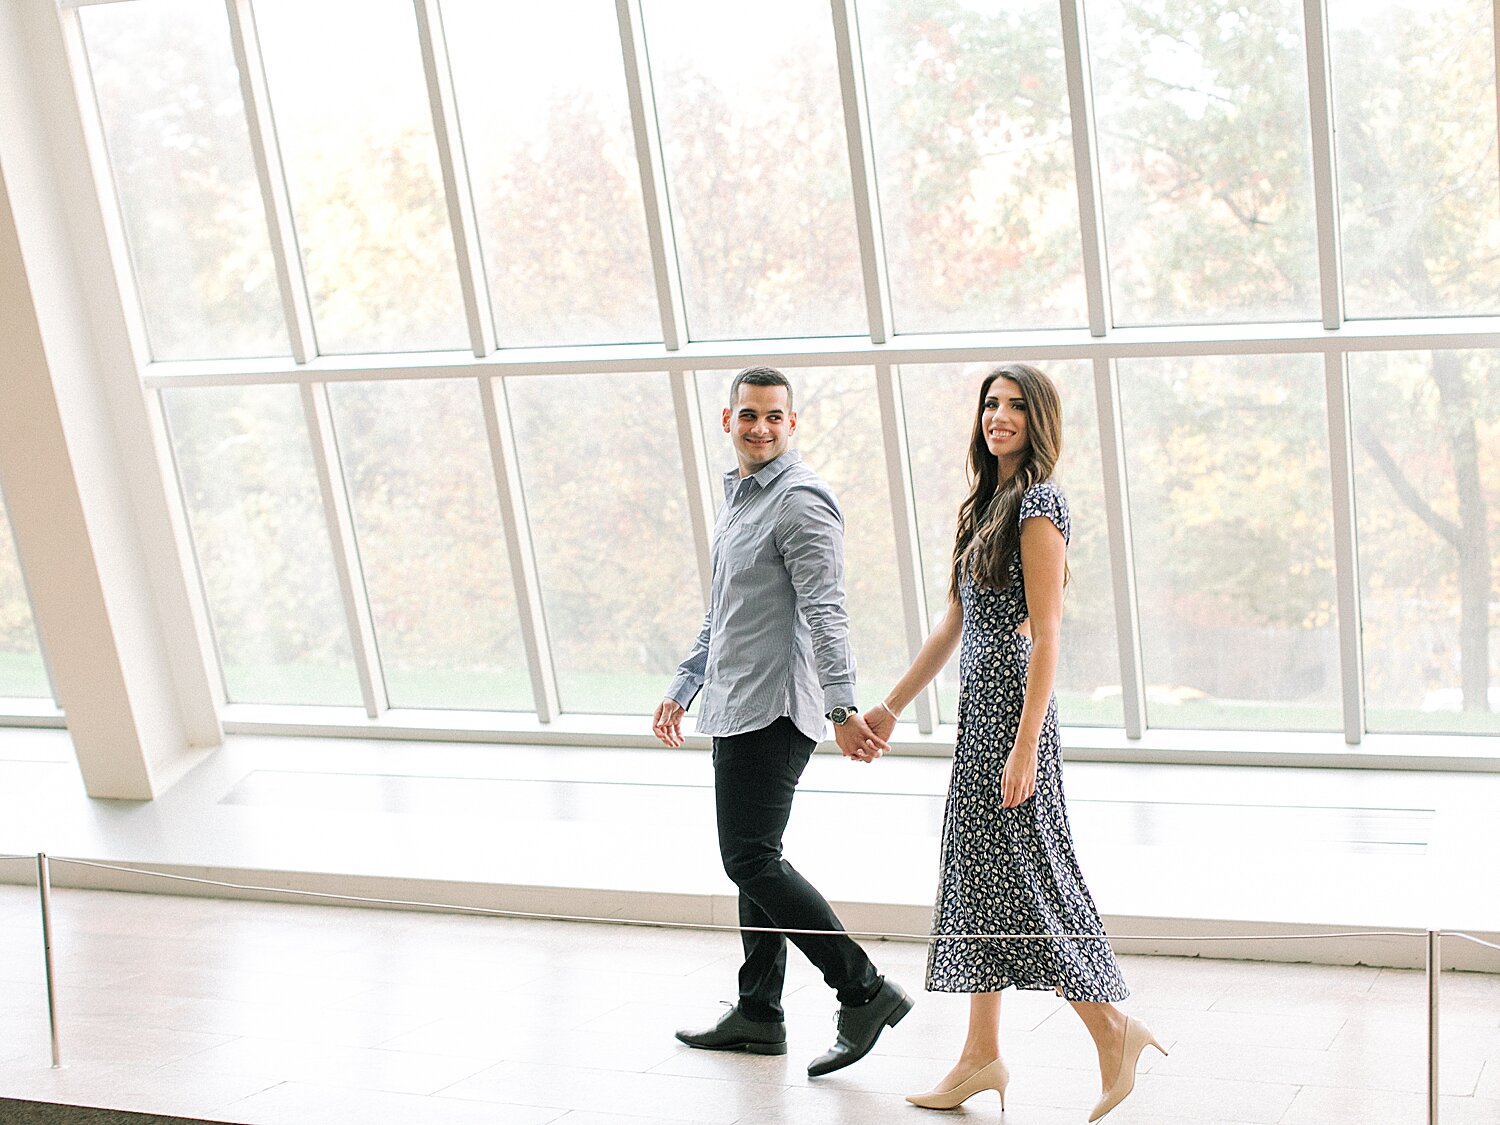 Asher Gardner Photography captures engagement photos by The Met